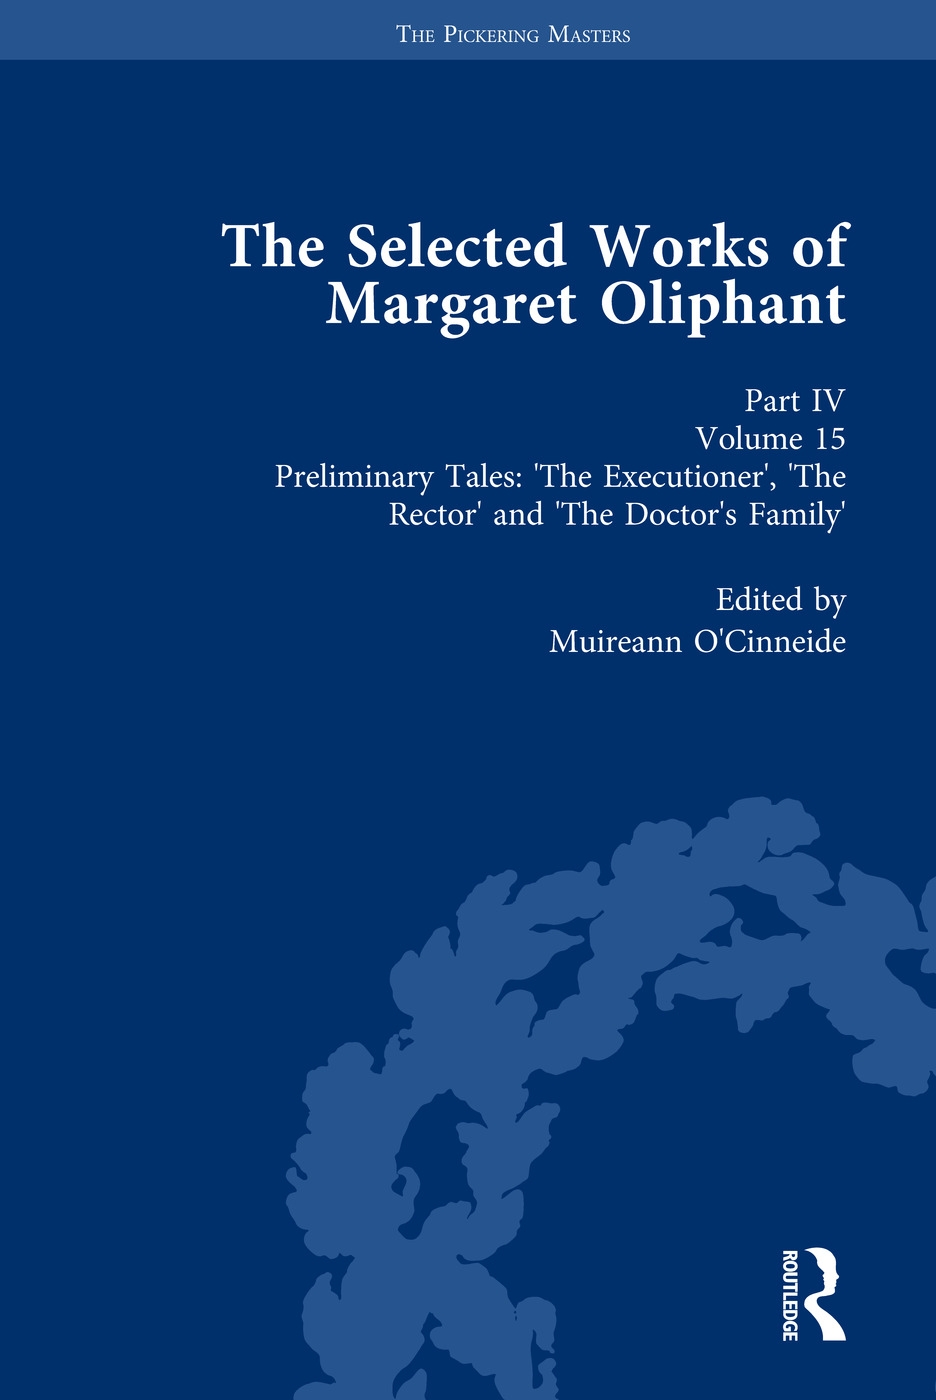 The Selected Works of Margaret Oliphant, Part IV Volume 15: Preliminary Tales: ’the Executioner’, ’the Rector’ and ’the Doctor’s Family’